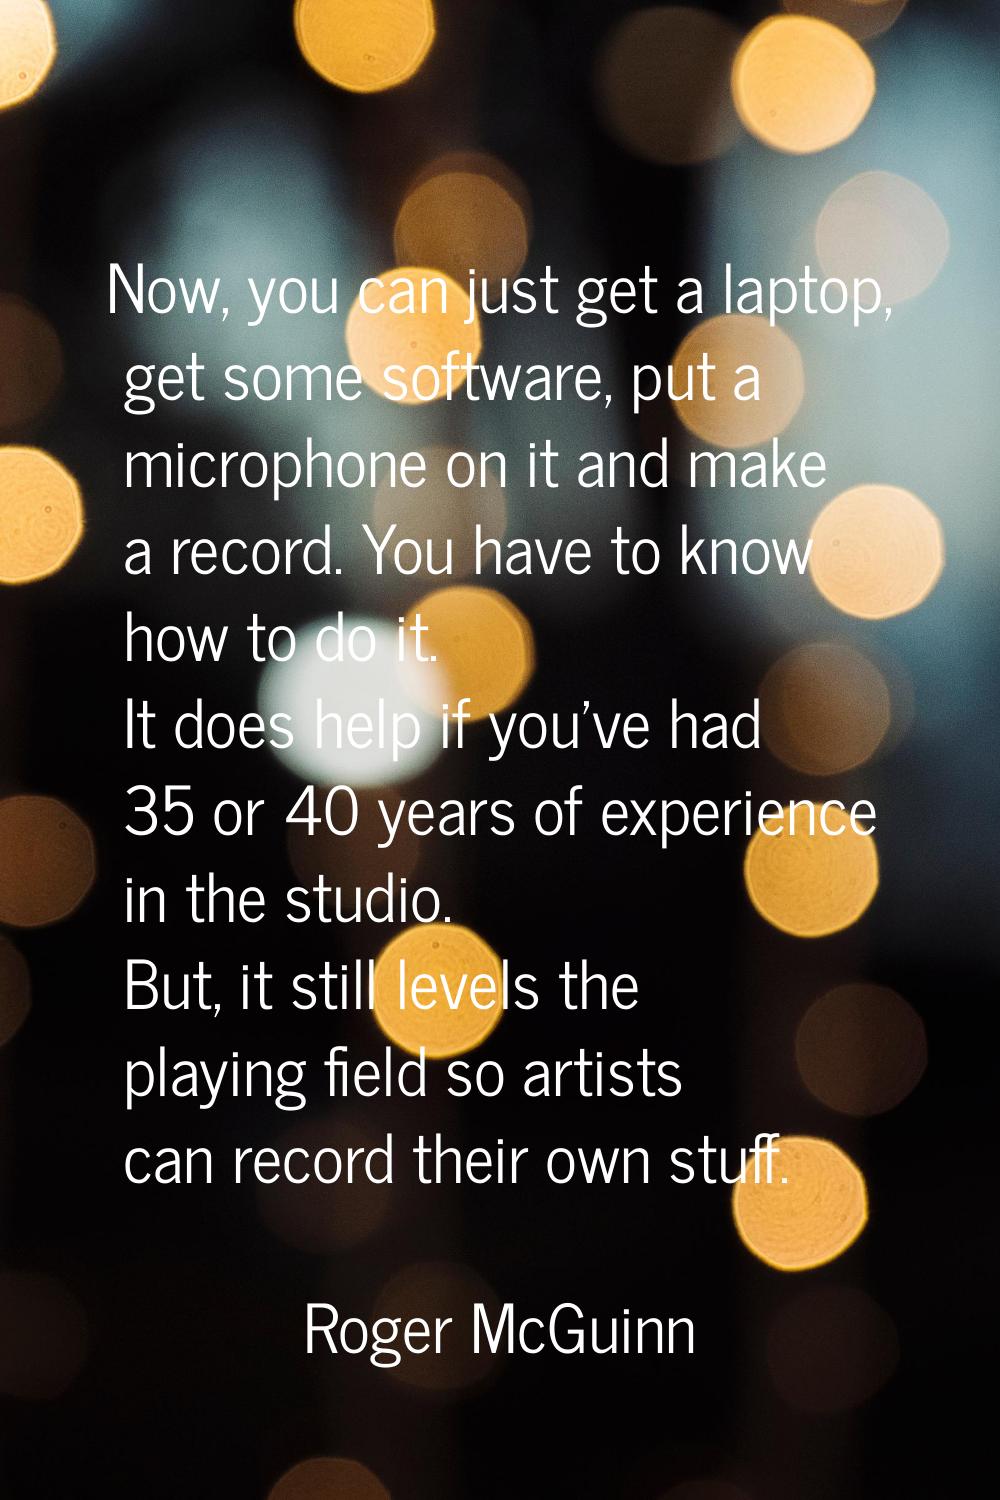 Now, you can just get a laptop, get some software, put a microphone on it and make a record. You ha